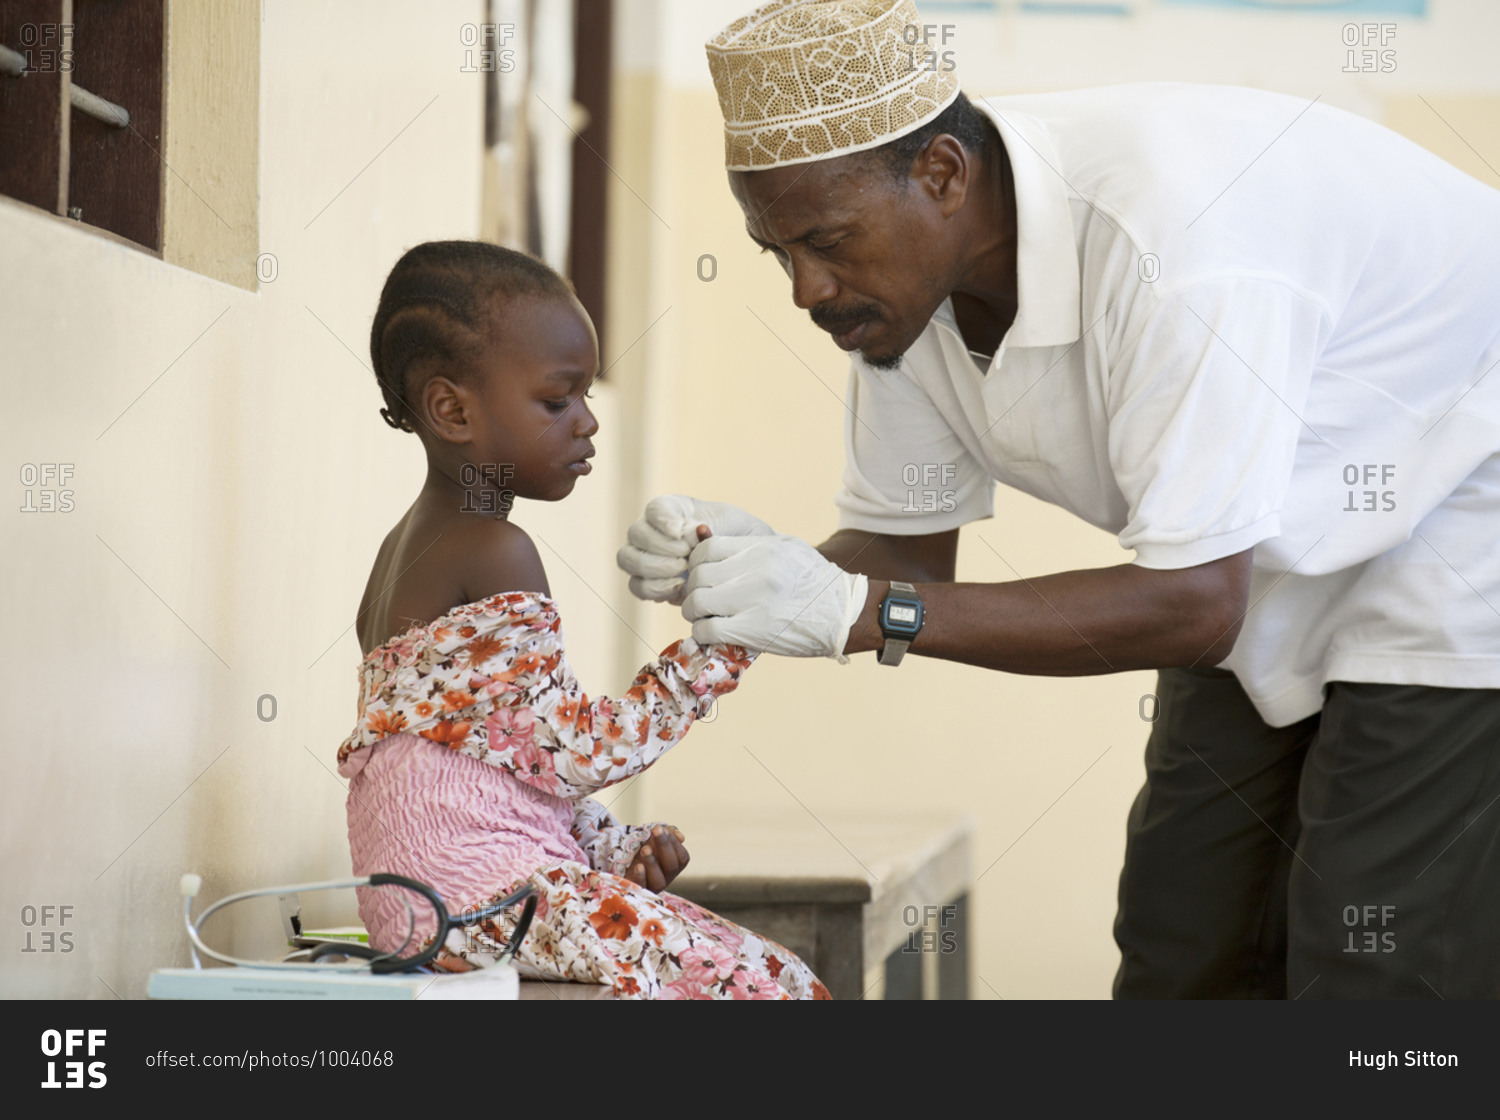 Doctor treating a young girl at a medical clinic in Africa